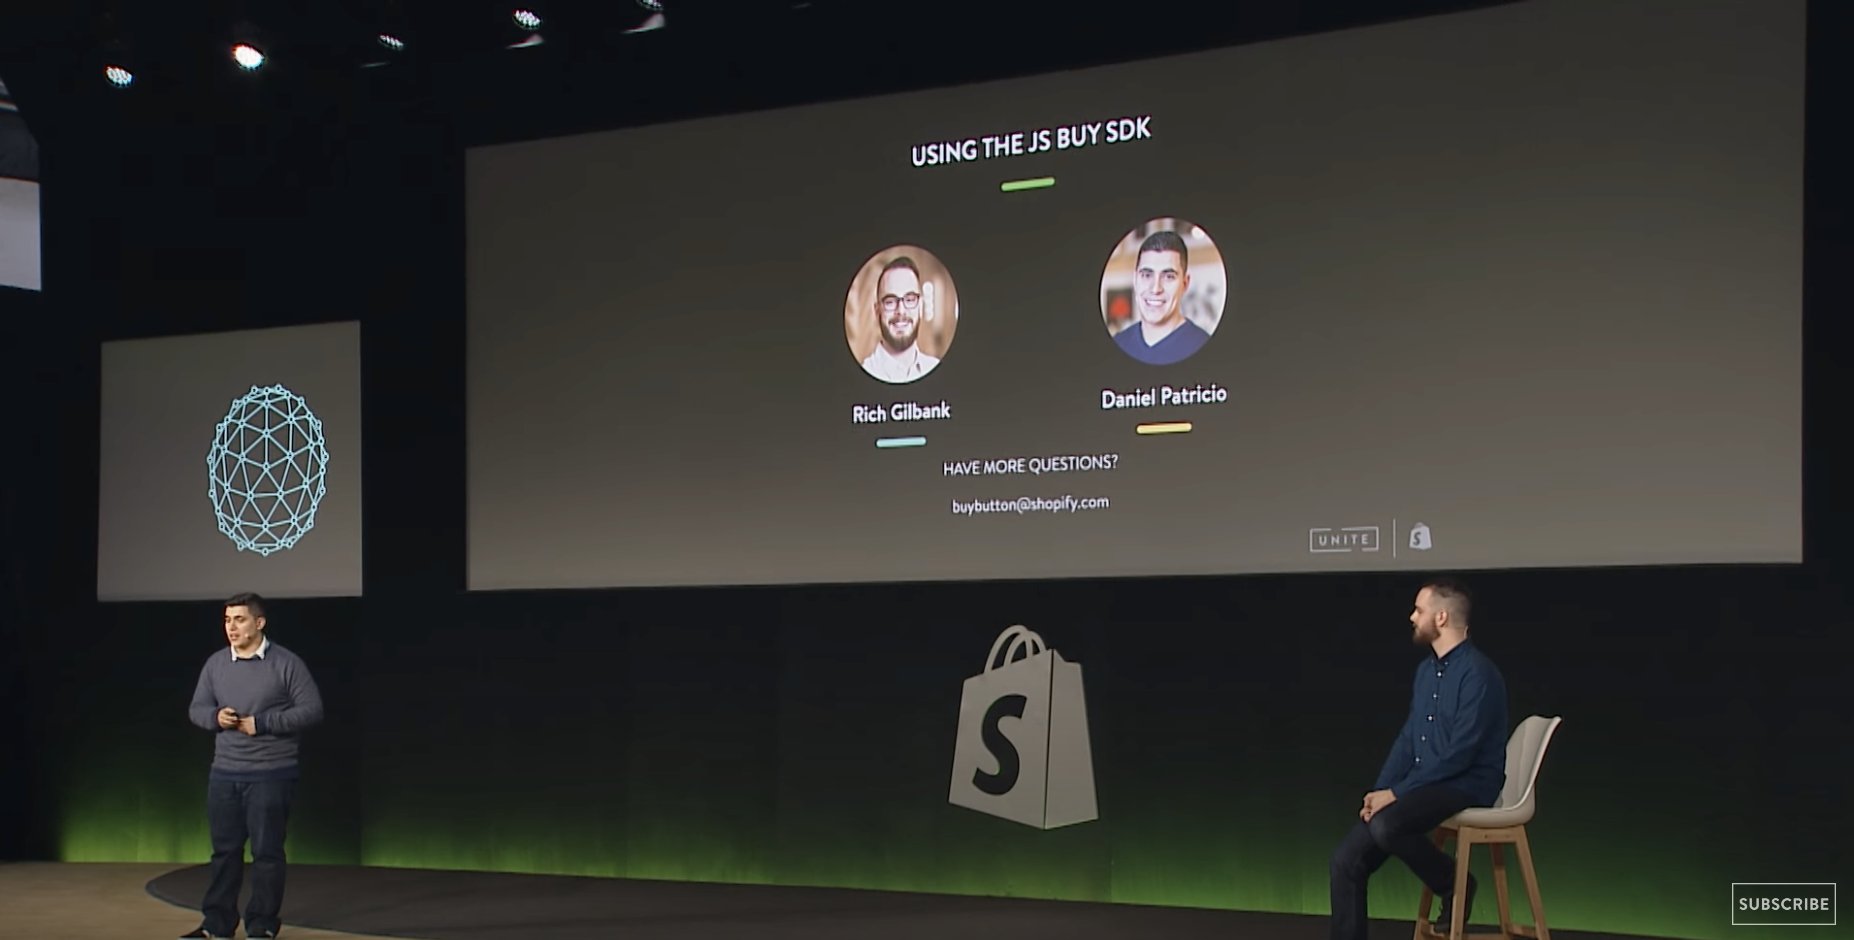 Daniel Patricio launches Shopify JavaScript Buy SDK to enable headless commerce for the first time